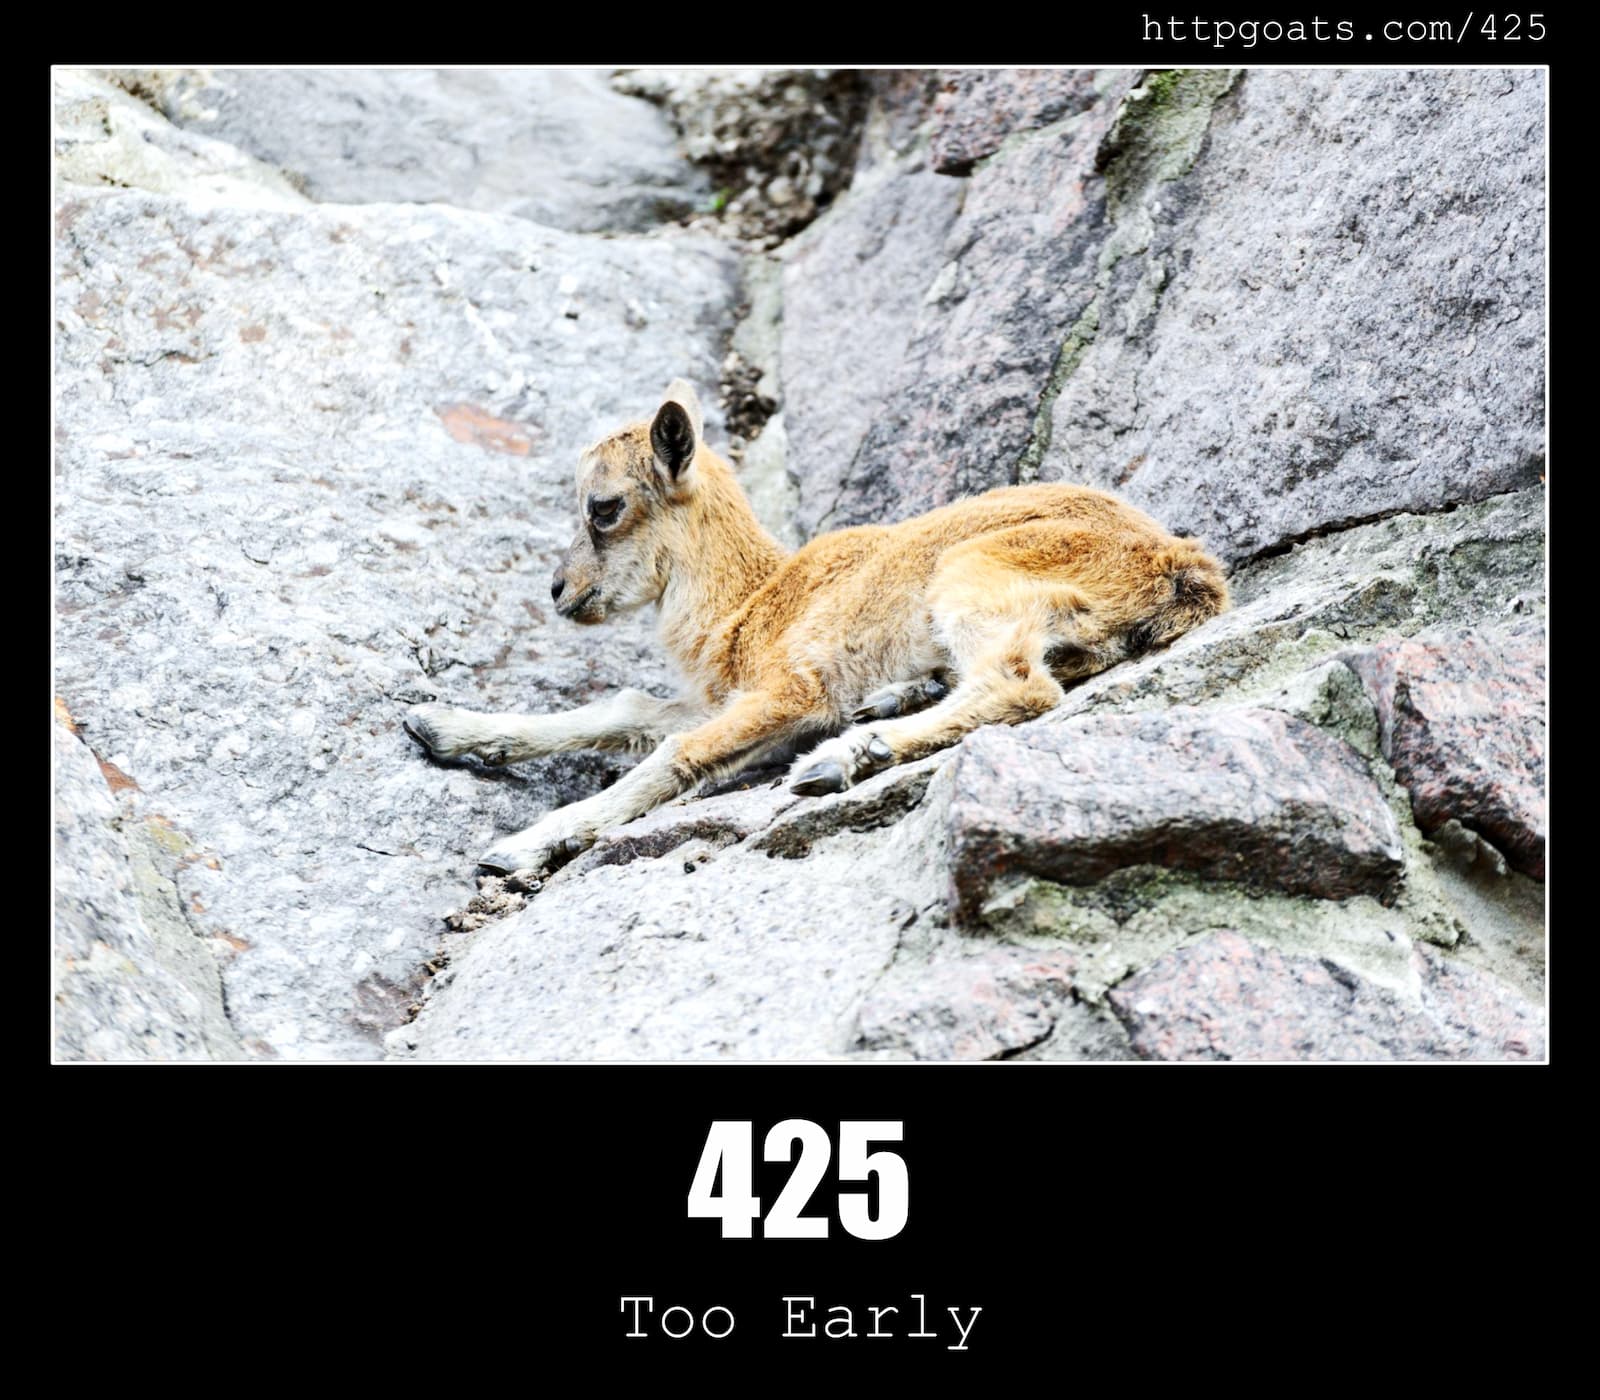 HTTP Status Code 425 Too Early & Goats